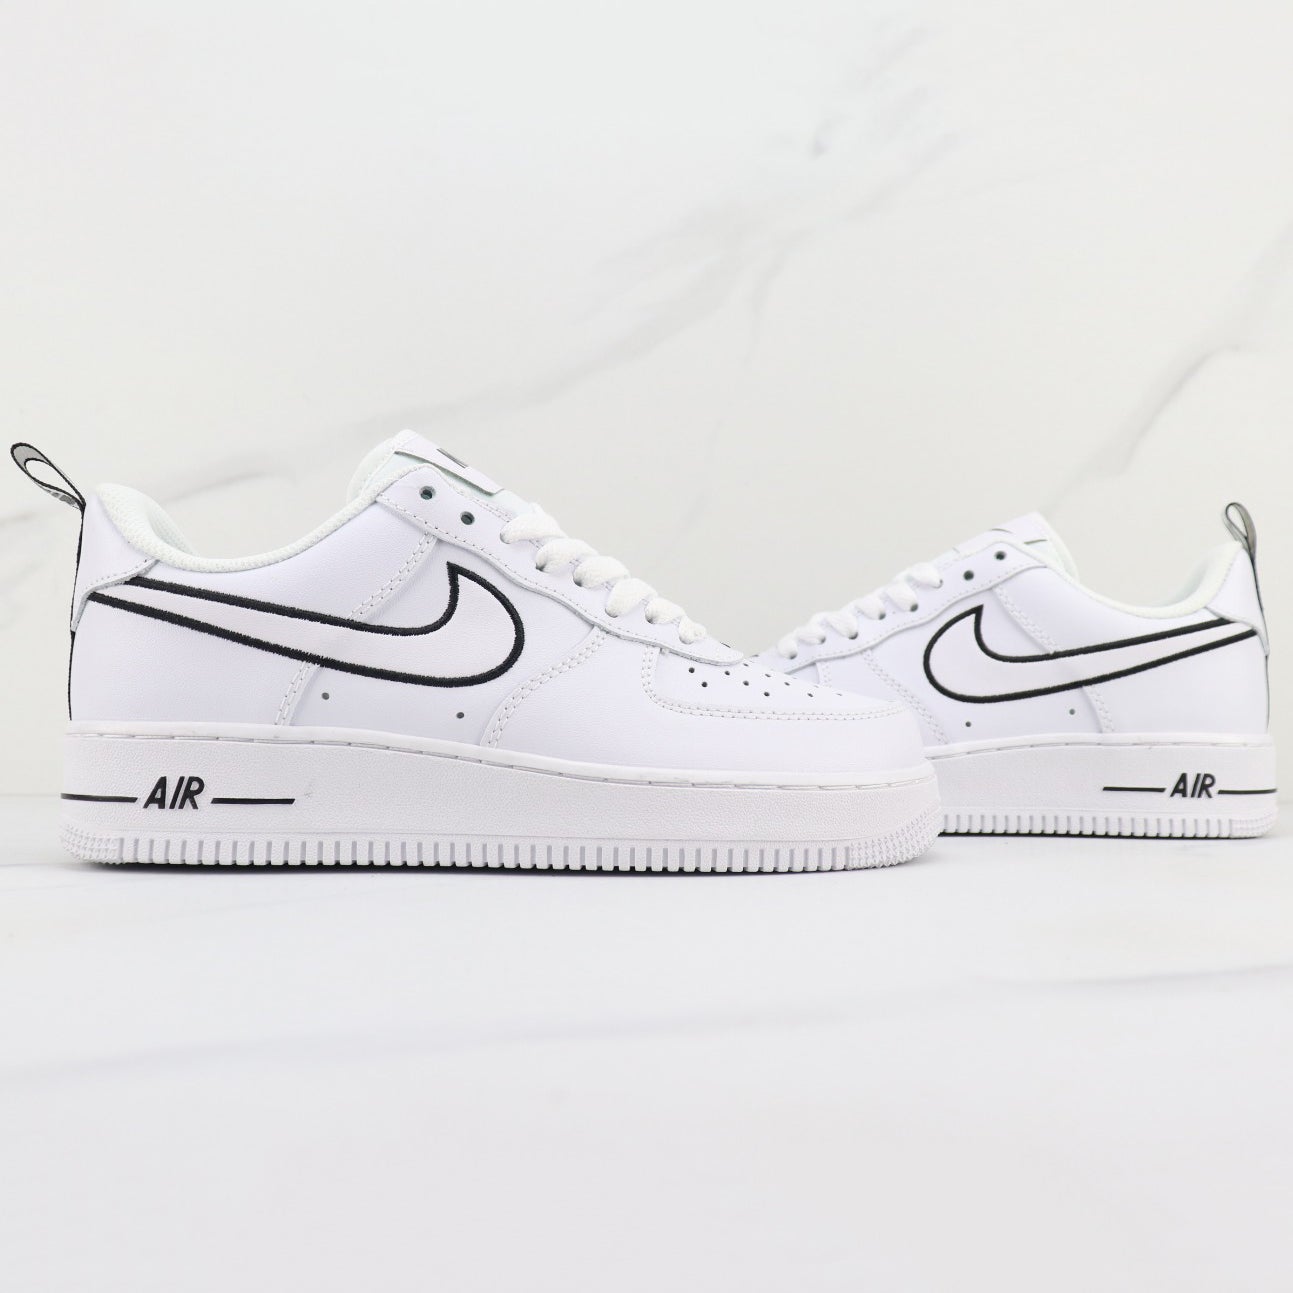 Nike Air Force 1'07 Low Top Shoes Flats Shoes Sneakers Sport Shoes